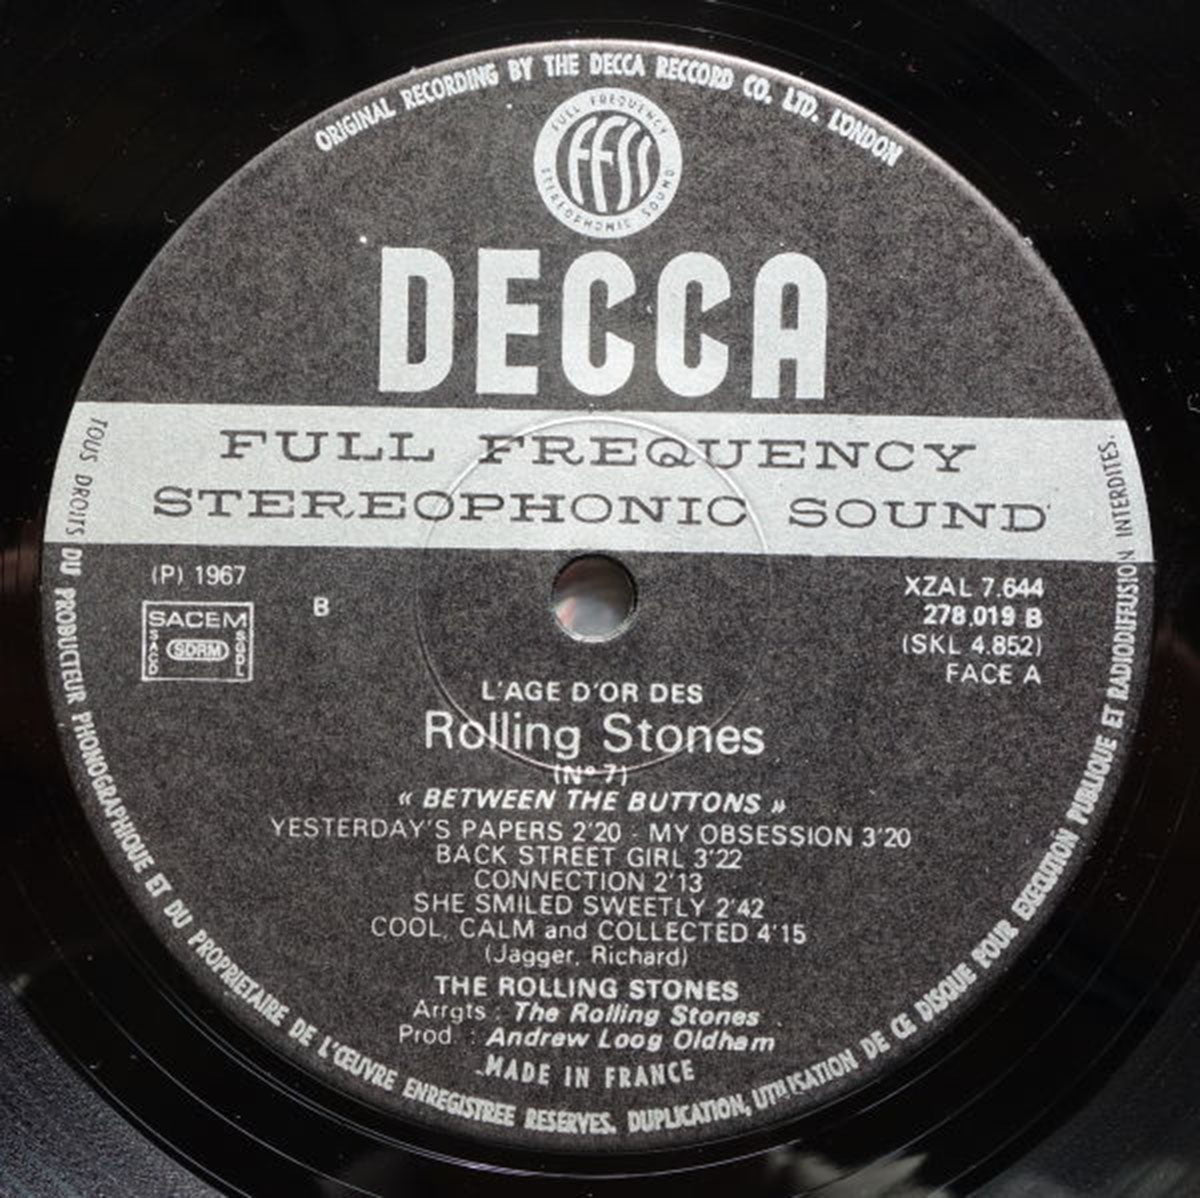 The Rolling Stones – L'âge D'or - Vol 7 - Between The Buttons - French Pressing - Rare